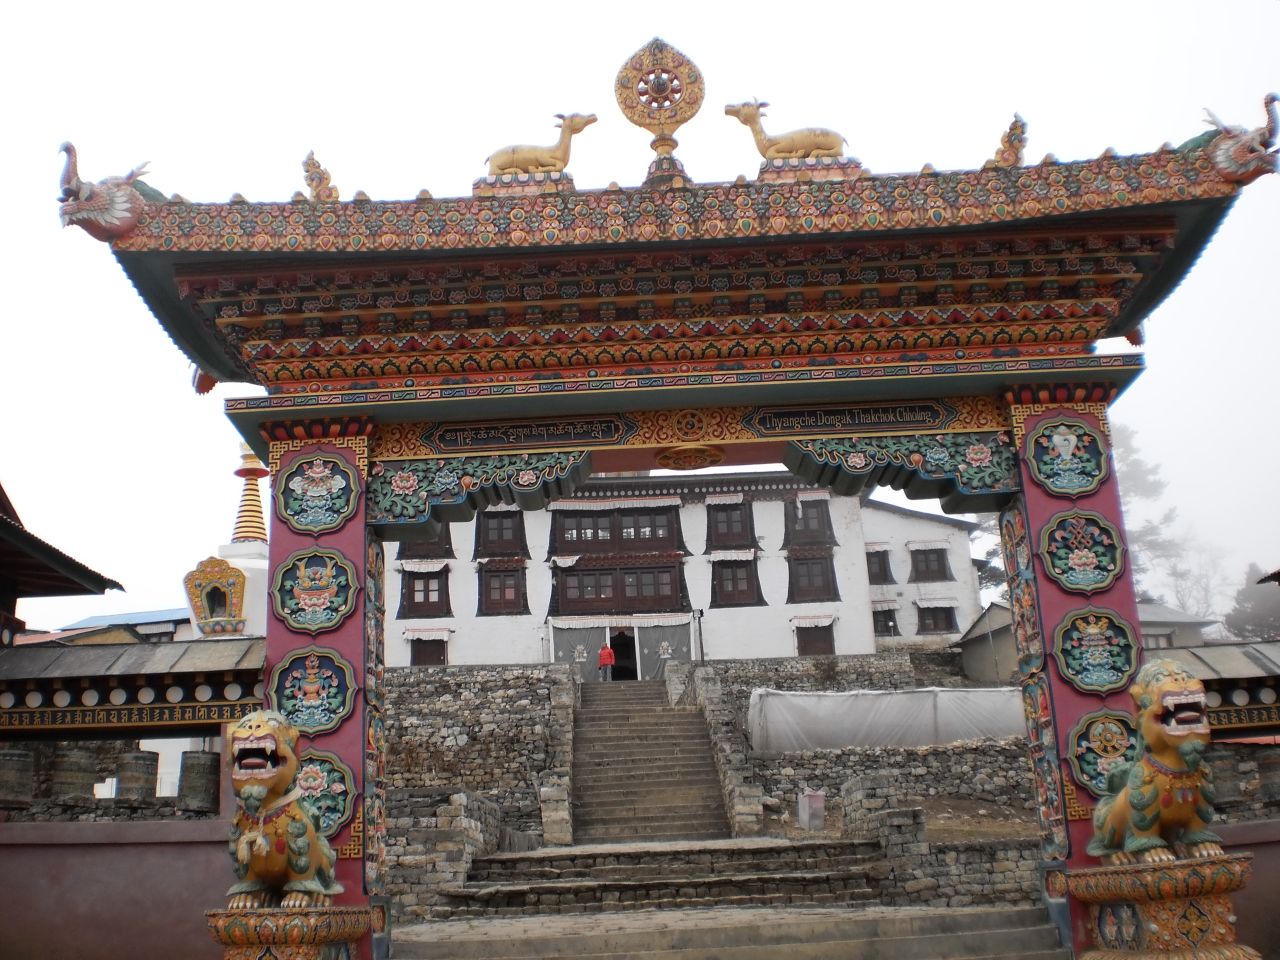 "Home to the highest monastery in Nepal, the Tengboche Monastery is situated in the Khumjung Valley, Solukhumbu, within the Sagarmatha (Everest) National Park, Nepal.  A peaceful, quiet, chilled and serene place, it is also home for Buddhist monks," says iReporter Kuna Rajandran.